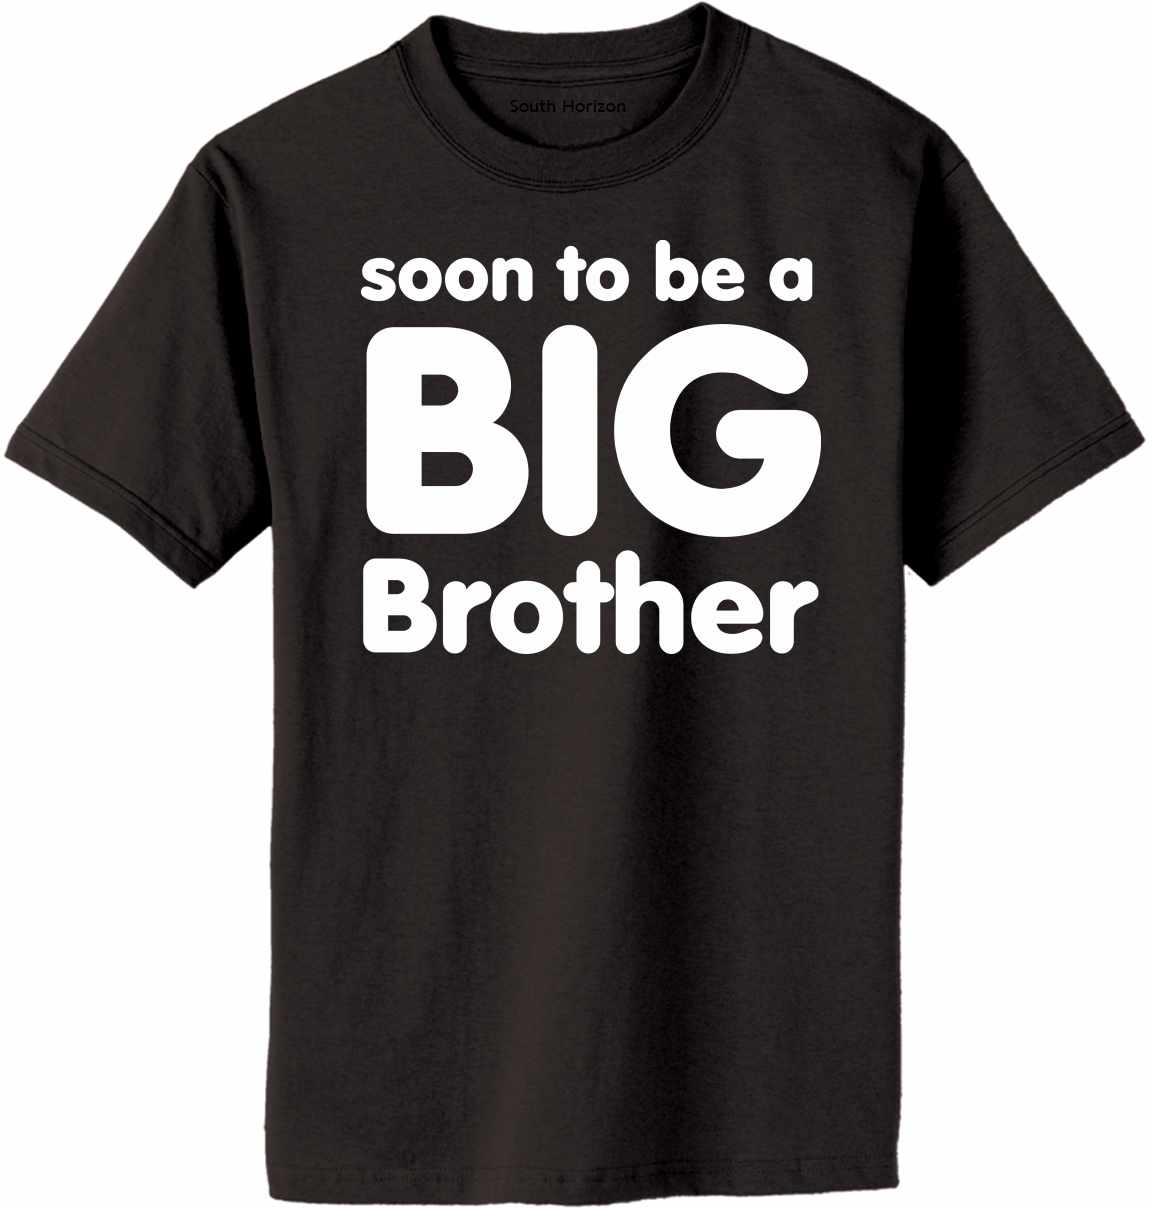 Soon to be a BIG BROTHER Adult T-Shirt (#590-1)